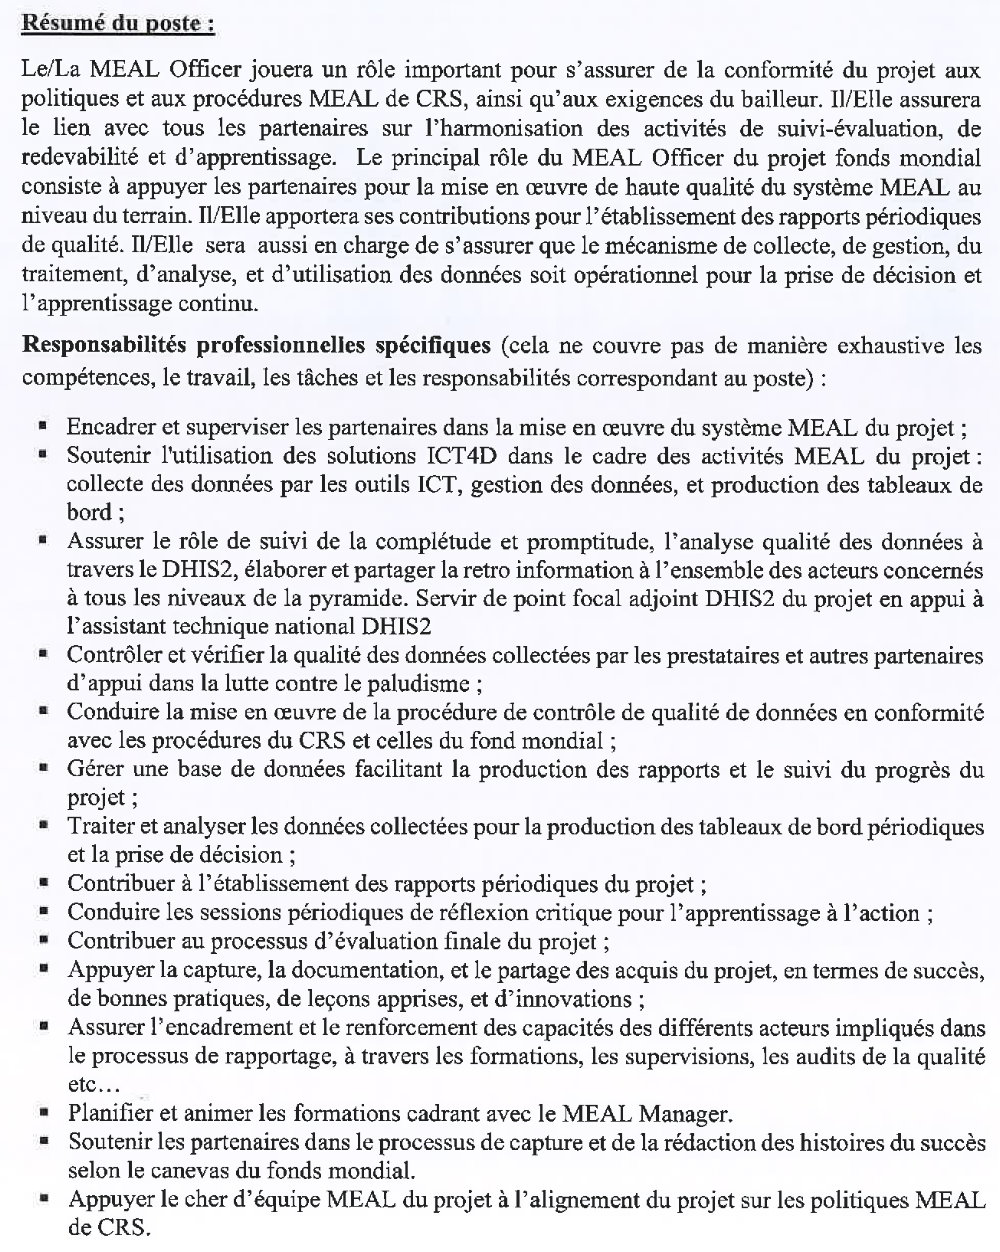 Avis de recrutement d’un(e) chargé(e) Monitoring, Evaluation Accountability and Learning(MEAL) Officer p2